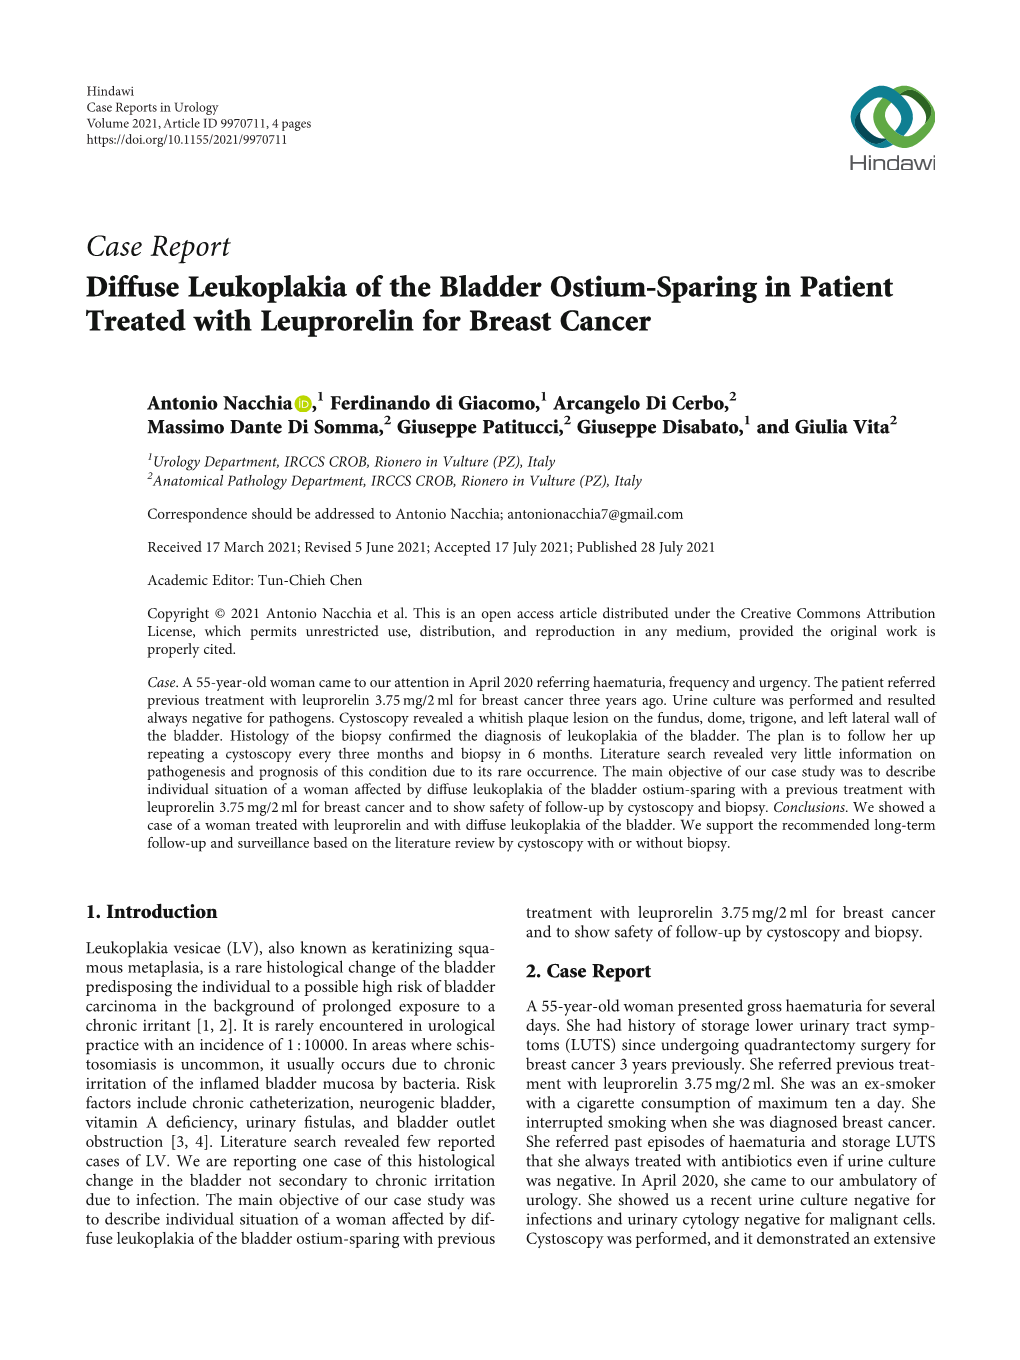 Diffuse Leukoplakia of the Bladder Ostium-Sparing in Patient Treated with Leuprorelin for Breast Cancer